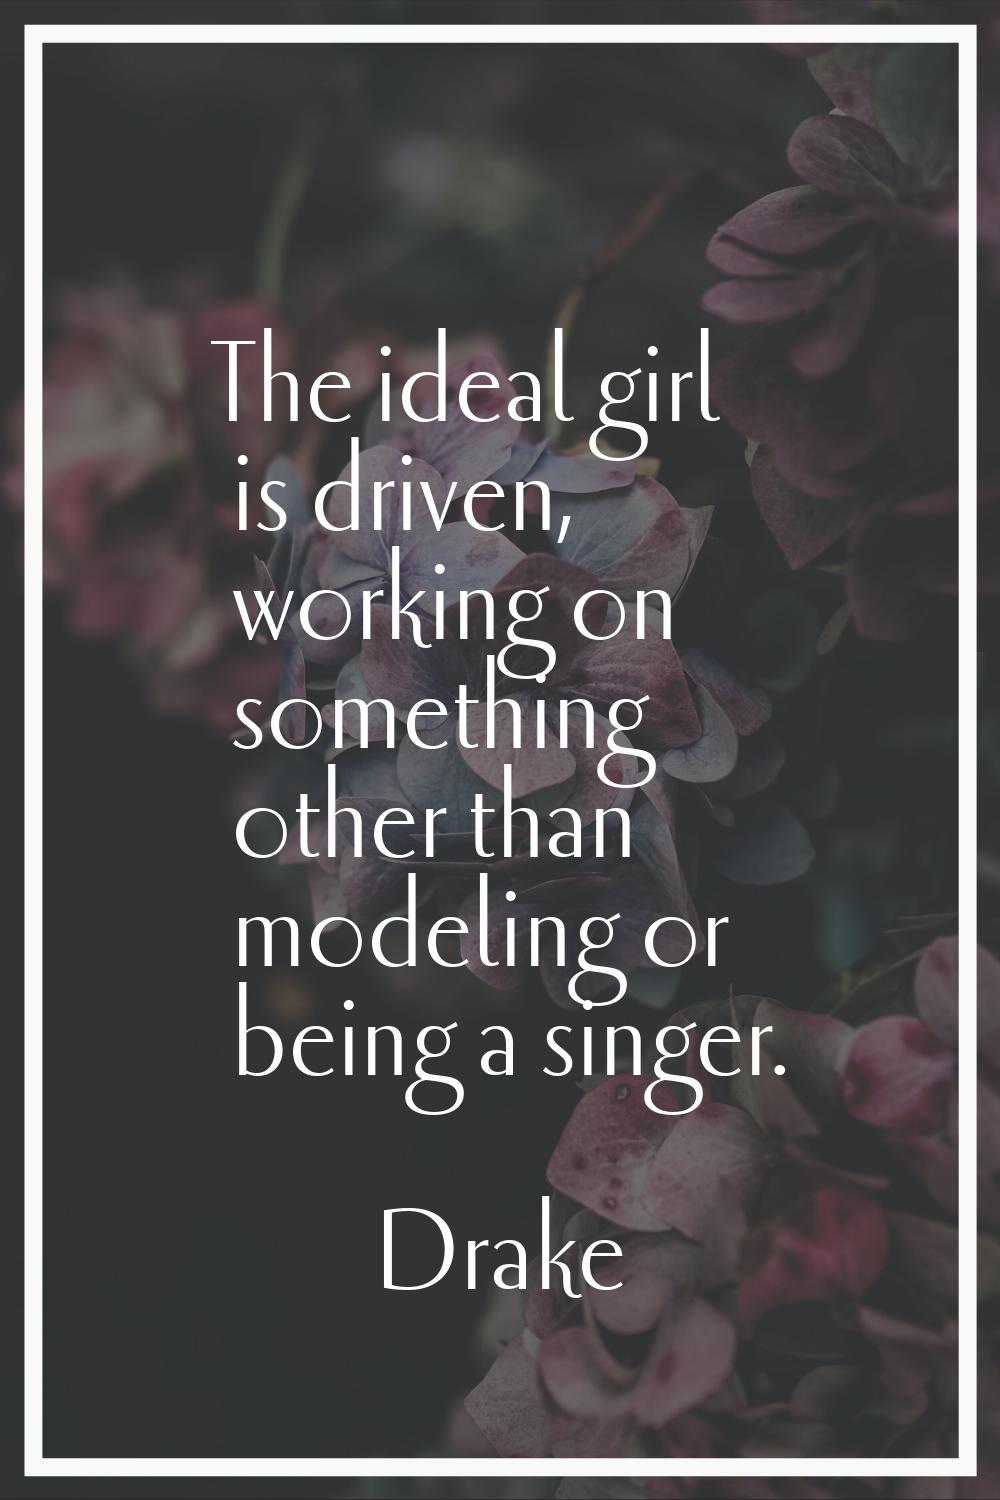 The ideal girl is driven, working on something other than modeling or being a singer.